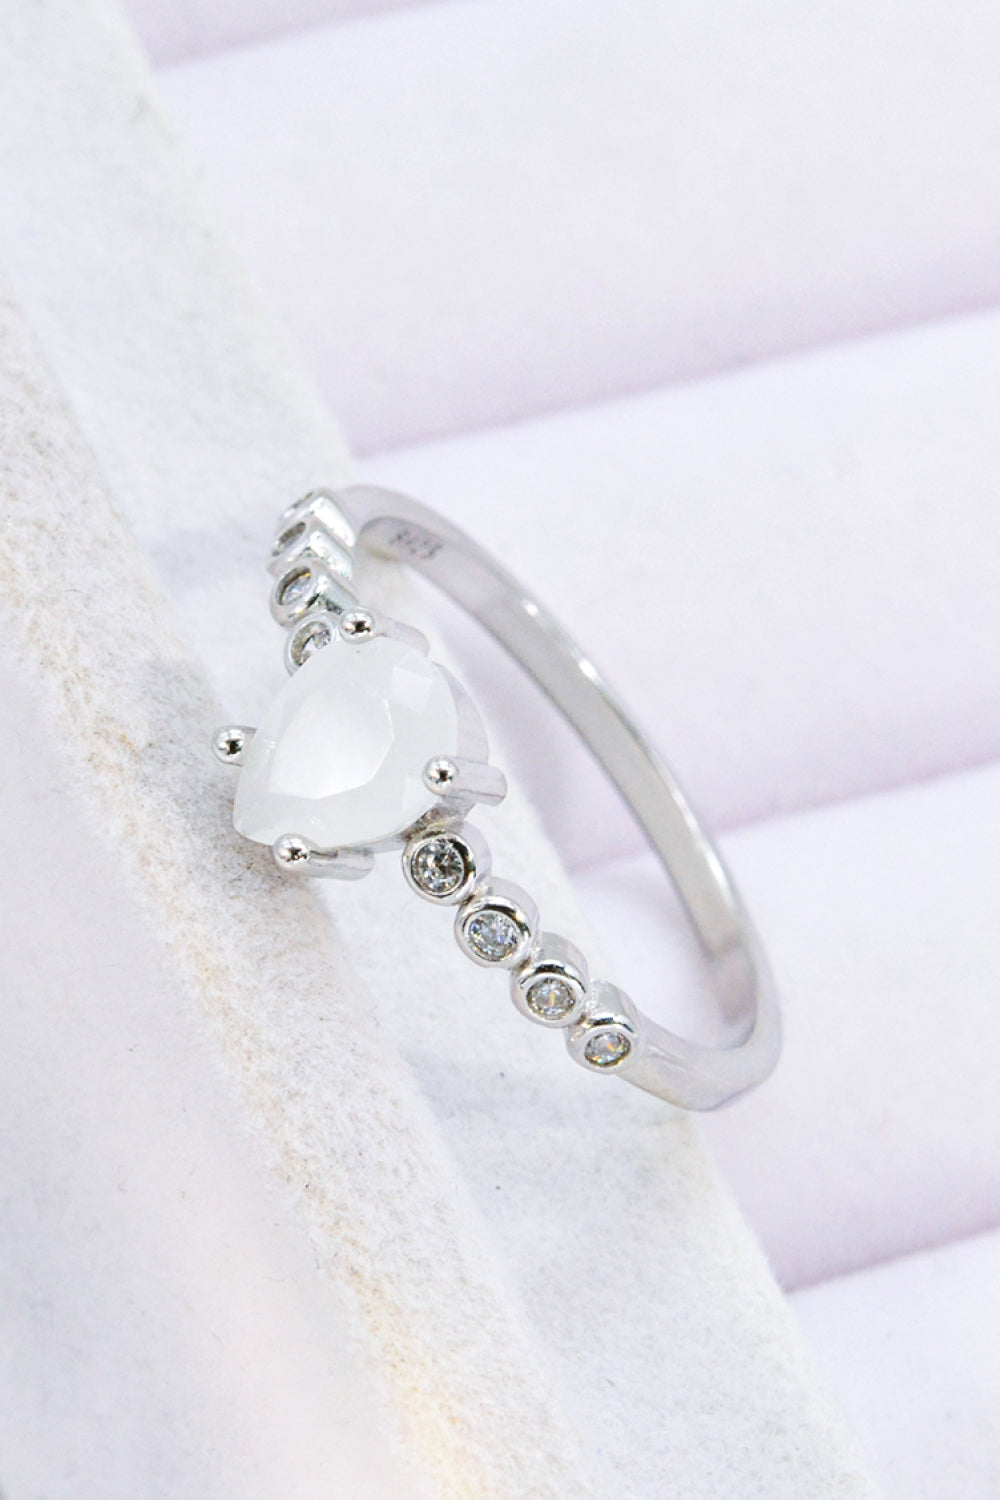 Lavender Teardrop Natural Moonstone Ring Sentient Beauty Fashions jewelry